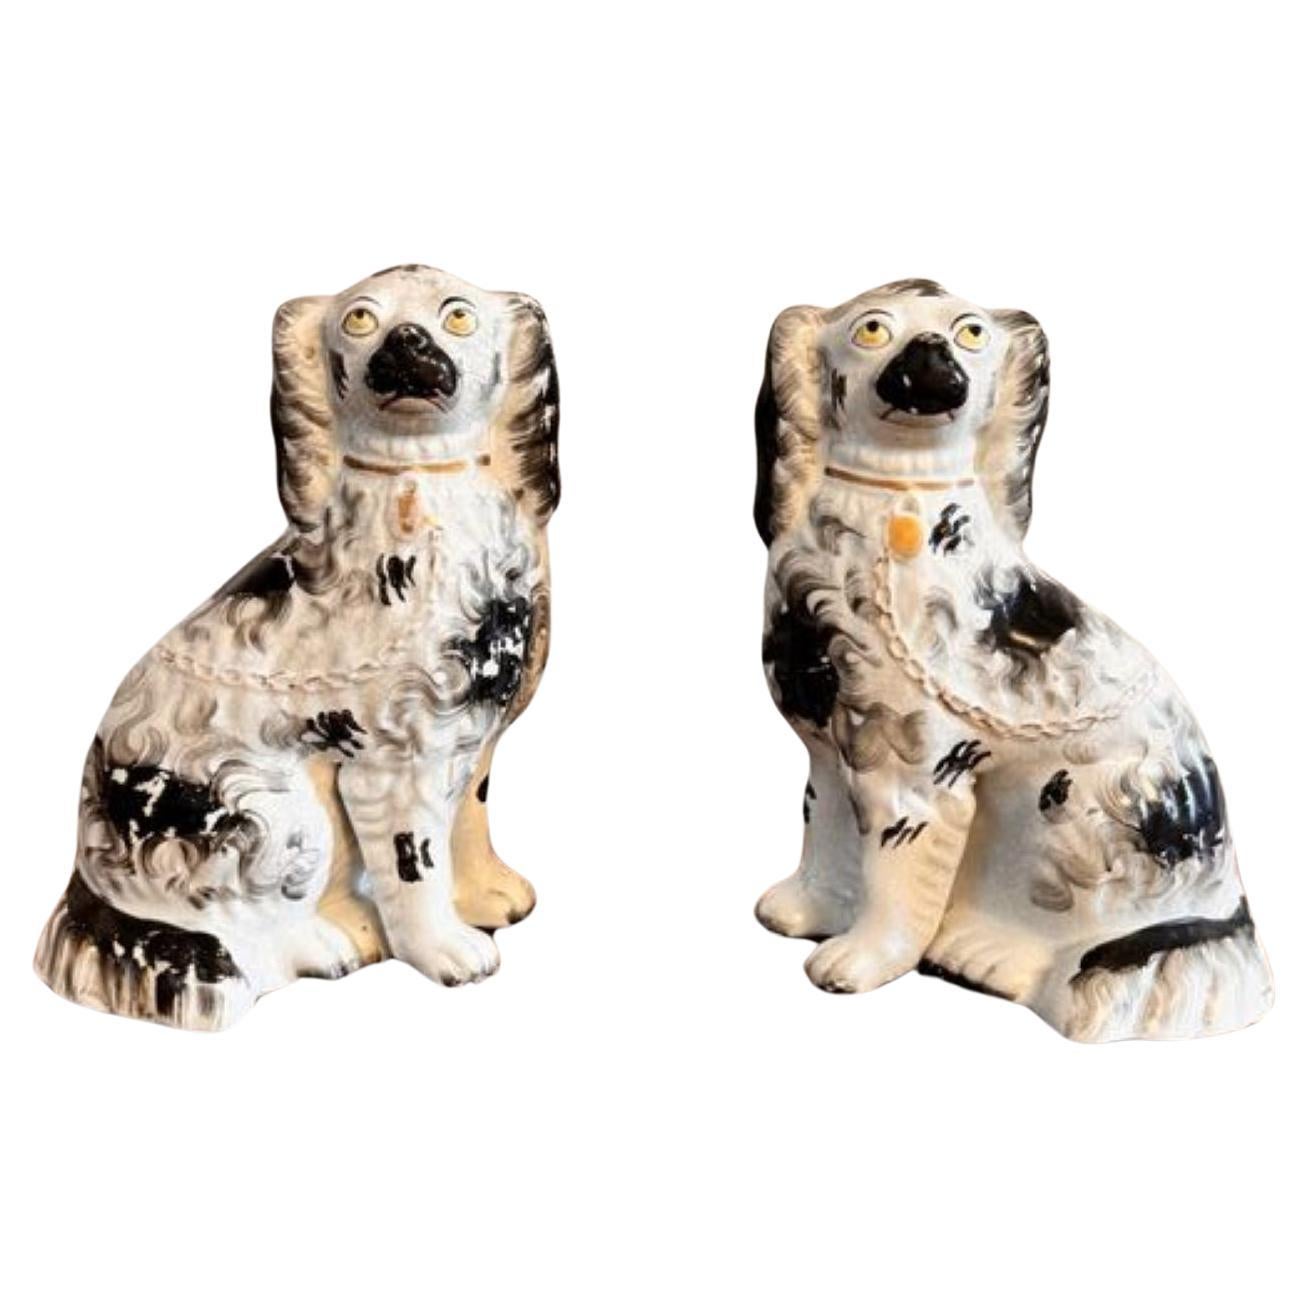 Quality pair of antique Victorian seated Staffordshire dogs